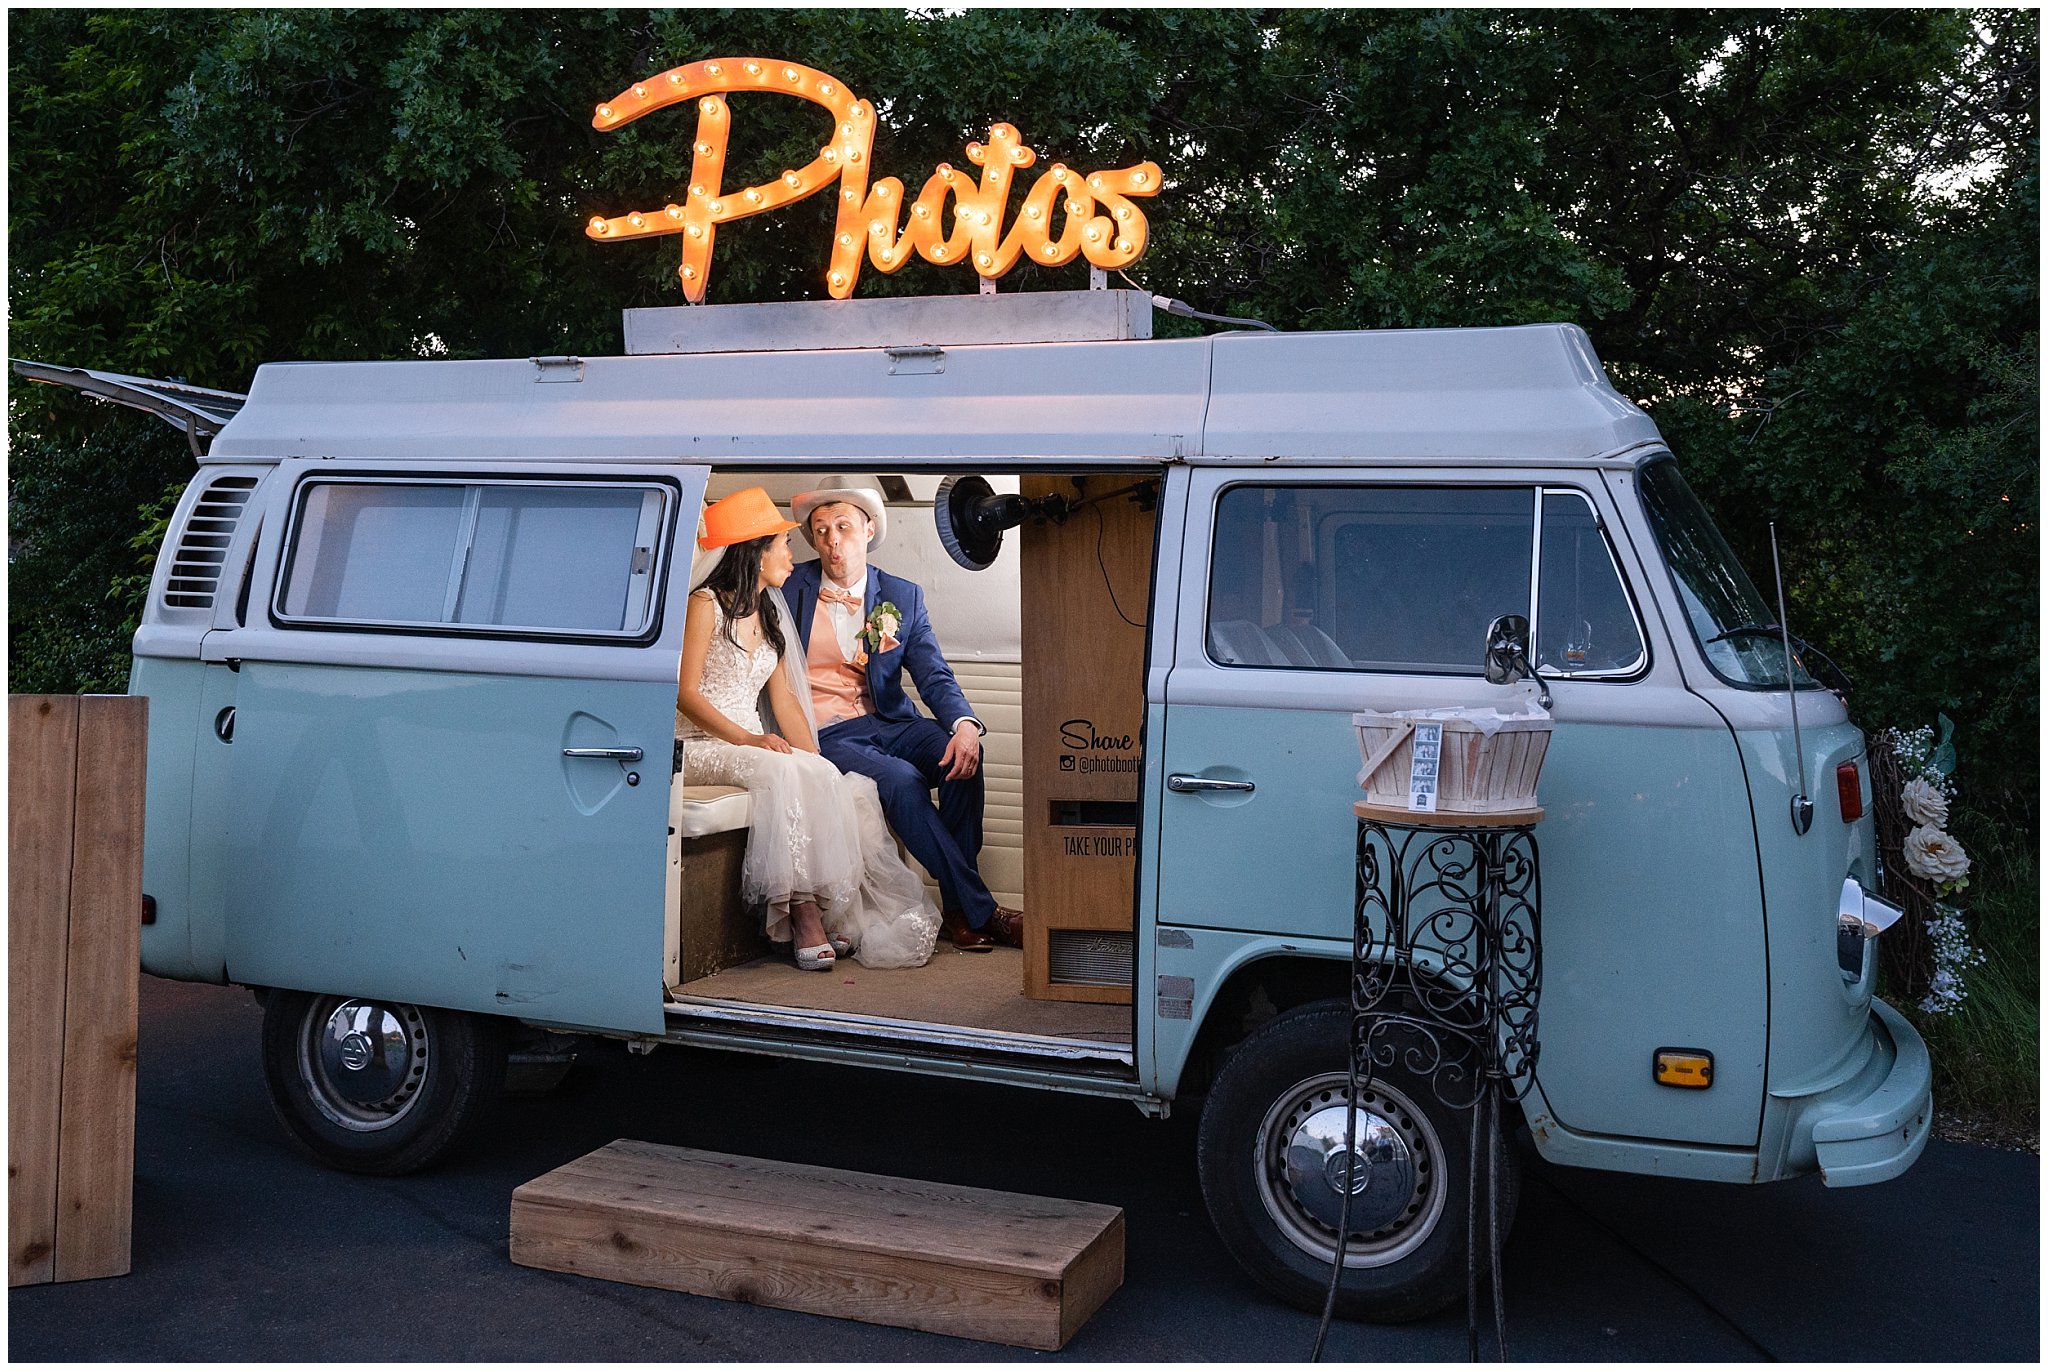 Bride and groom with photo bus | Oak Hills Utah Destination Wedding | Jessie and Dallin Photography